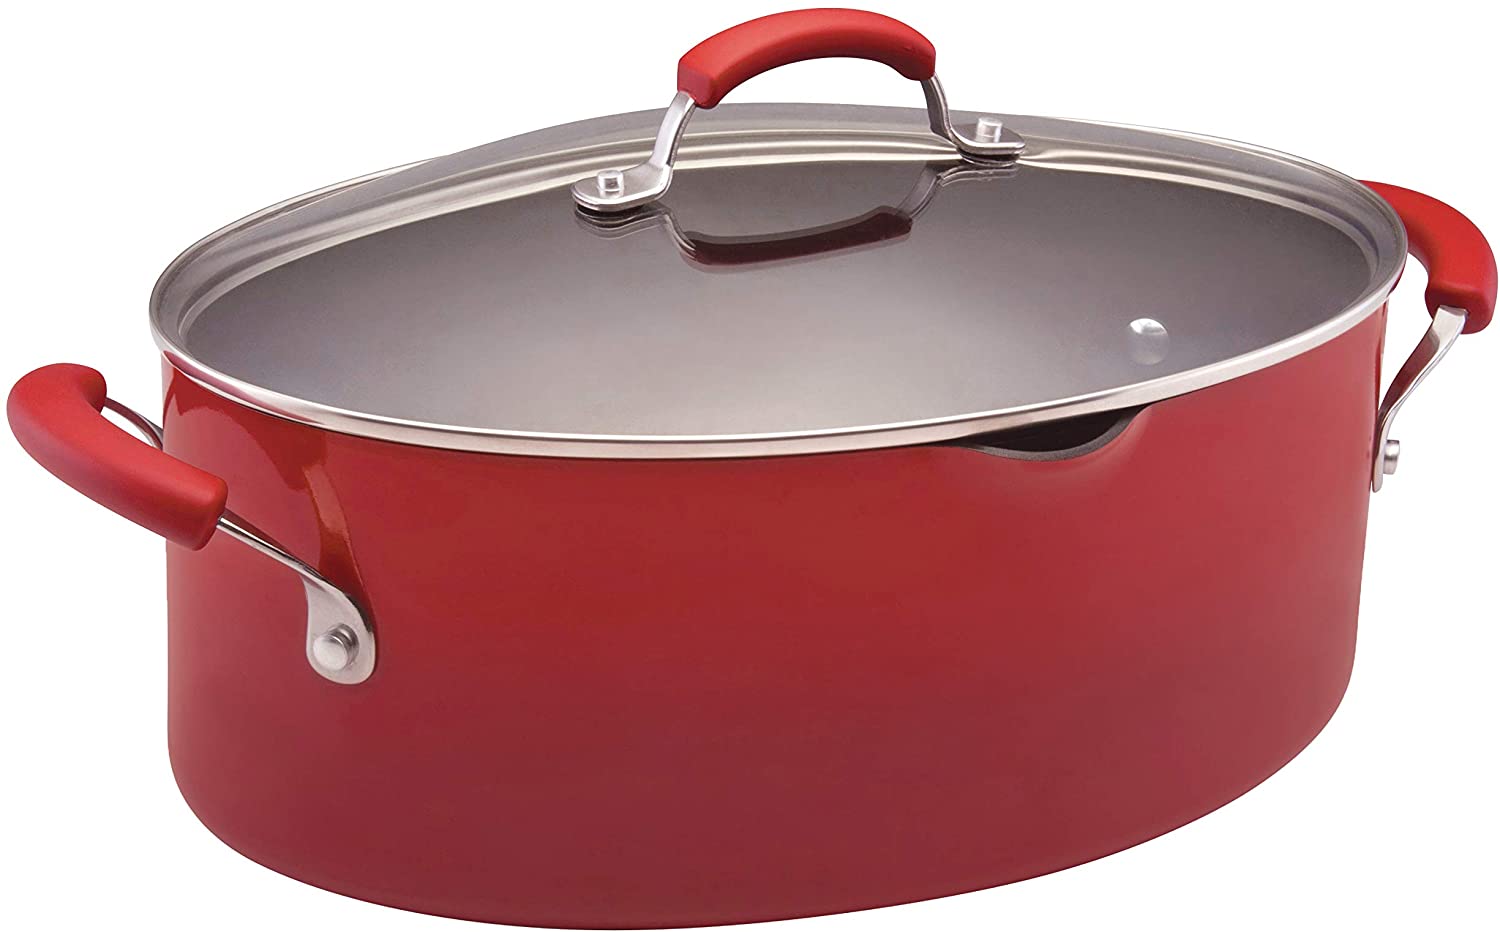 Rachael Ray 8qt Hard Anodized Nonstick Oval Pasta Pot And Braiser